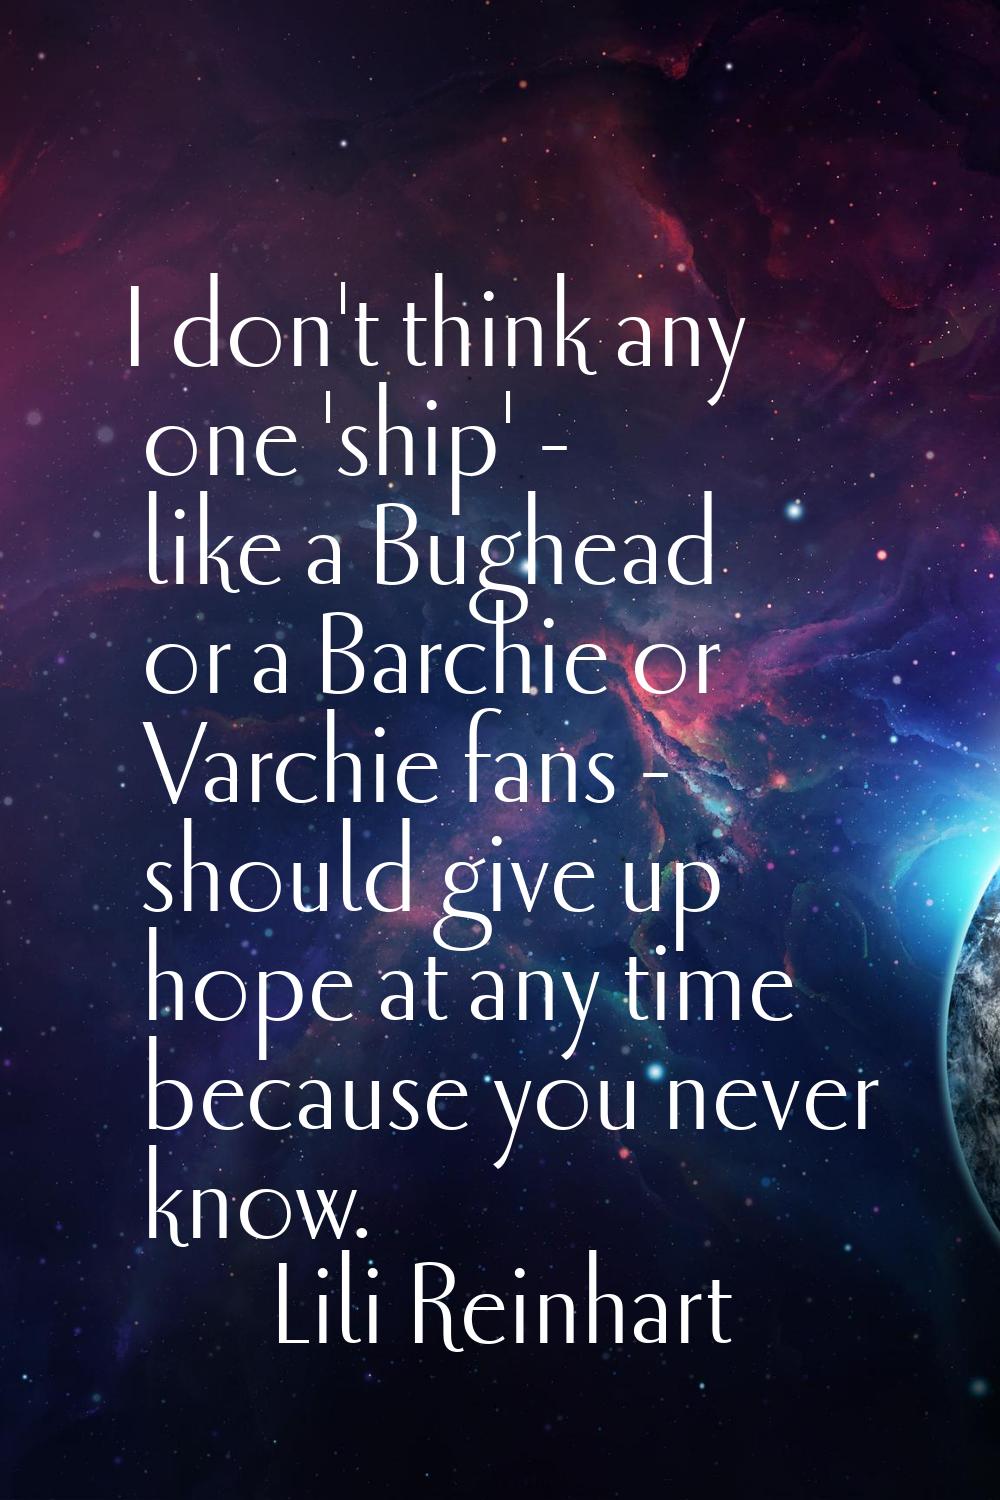 I don't think any one 'ship' - like a Bughead or a Barchie or Varchie fans - should give up hope at